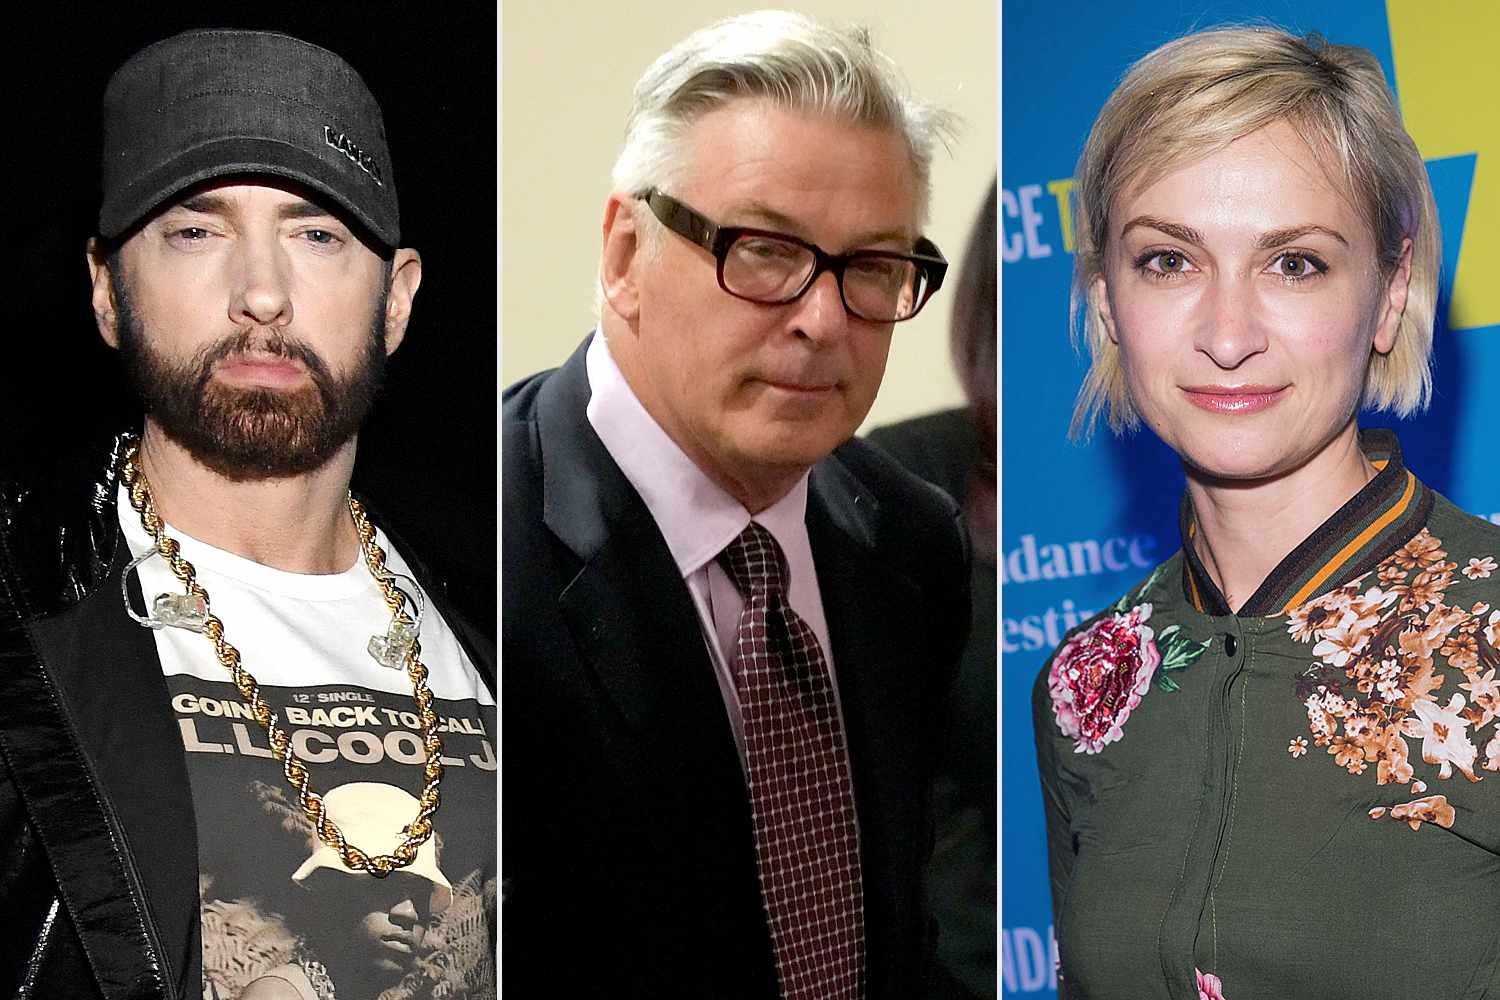 Eminem Makes Shocking Reference to Alec Baldwin, “Rust” Shooting in New Song: 'Get Popped Like Halyna Hutchins'